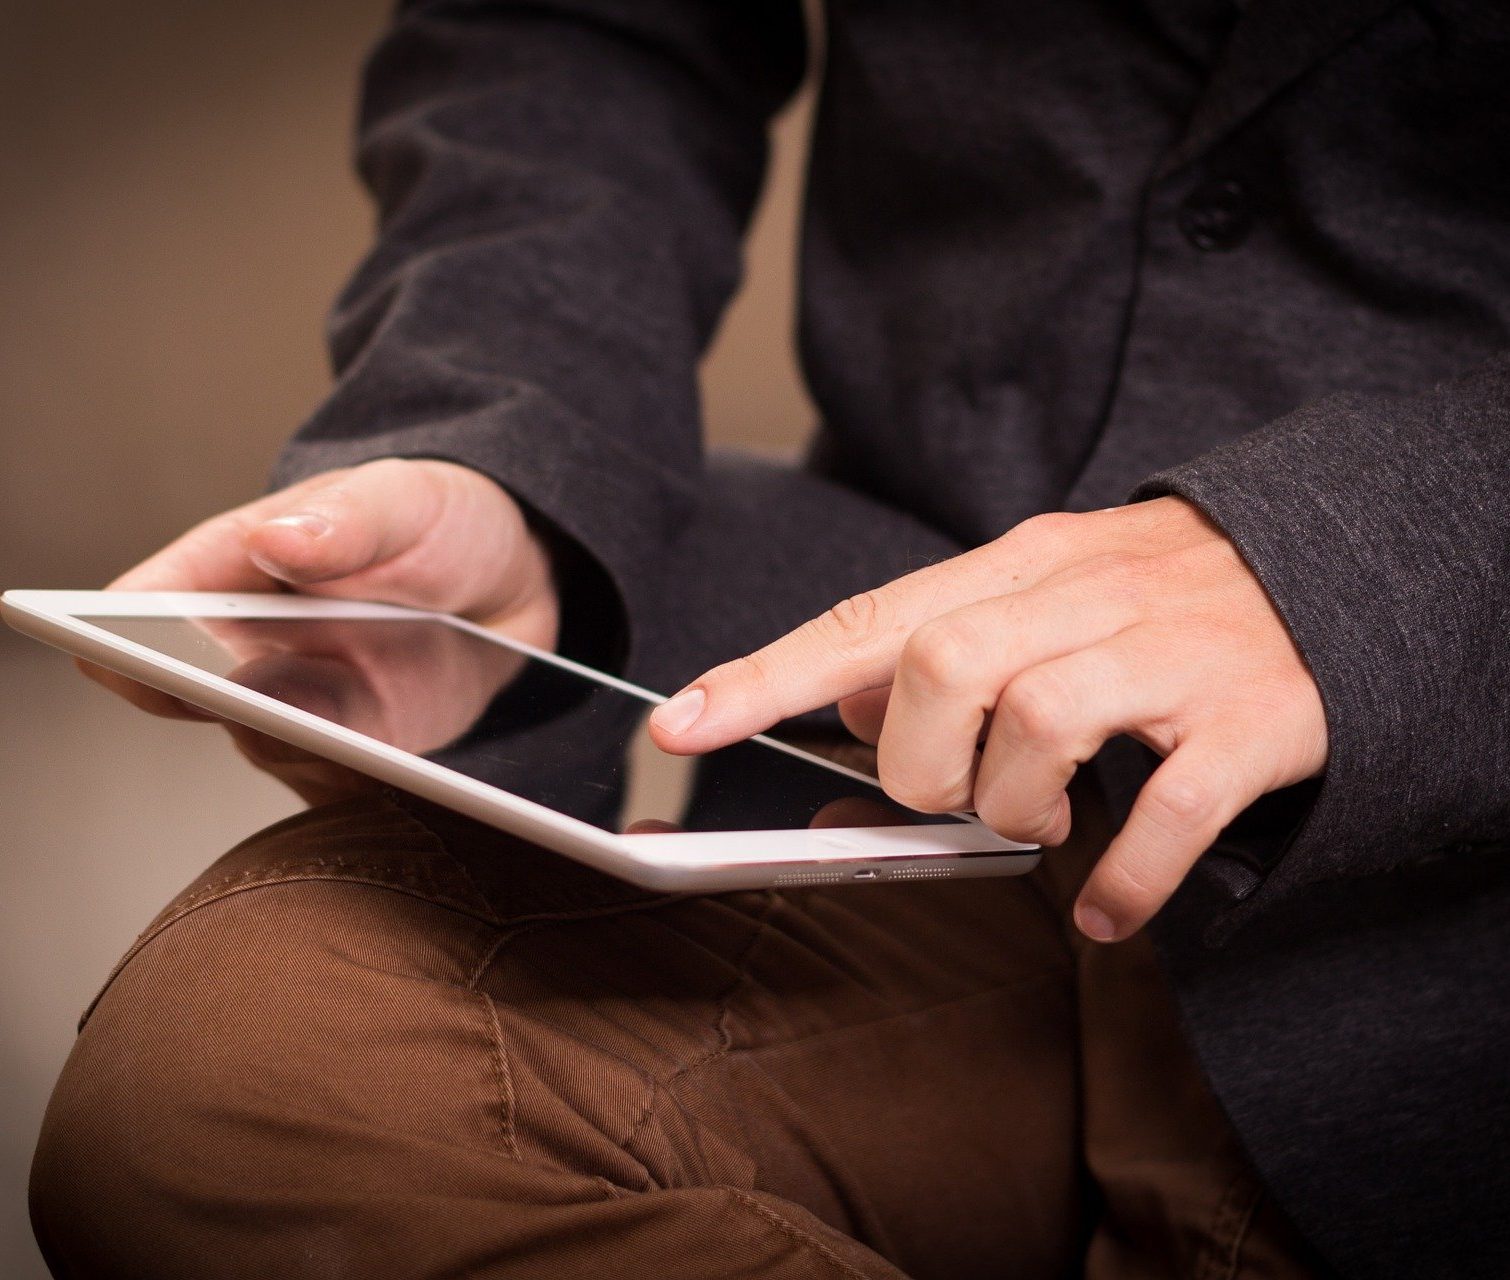 Man using a tablet device